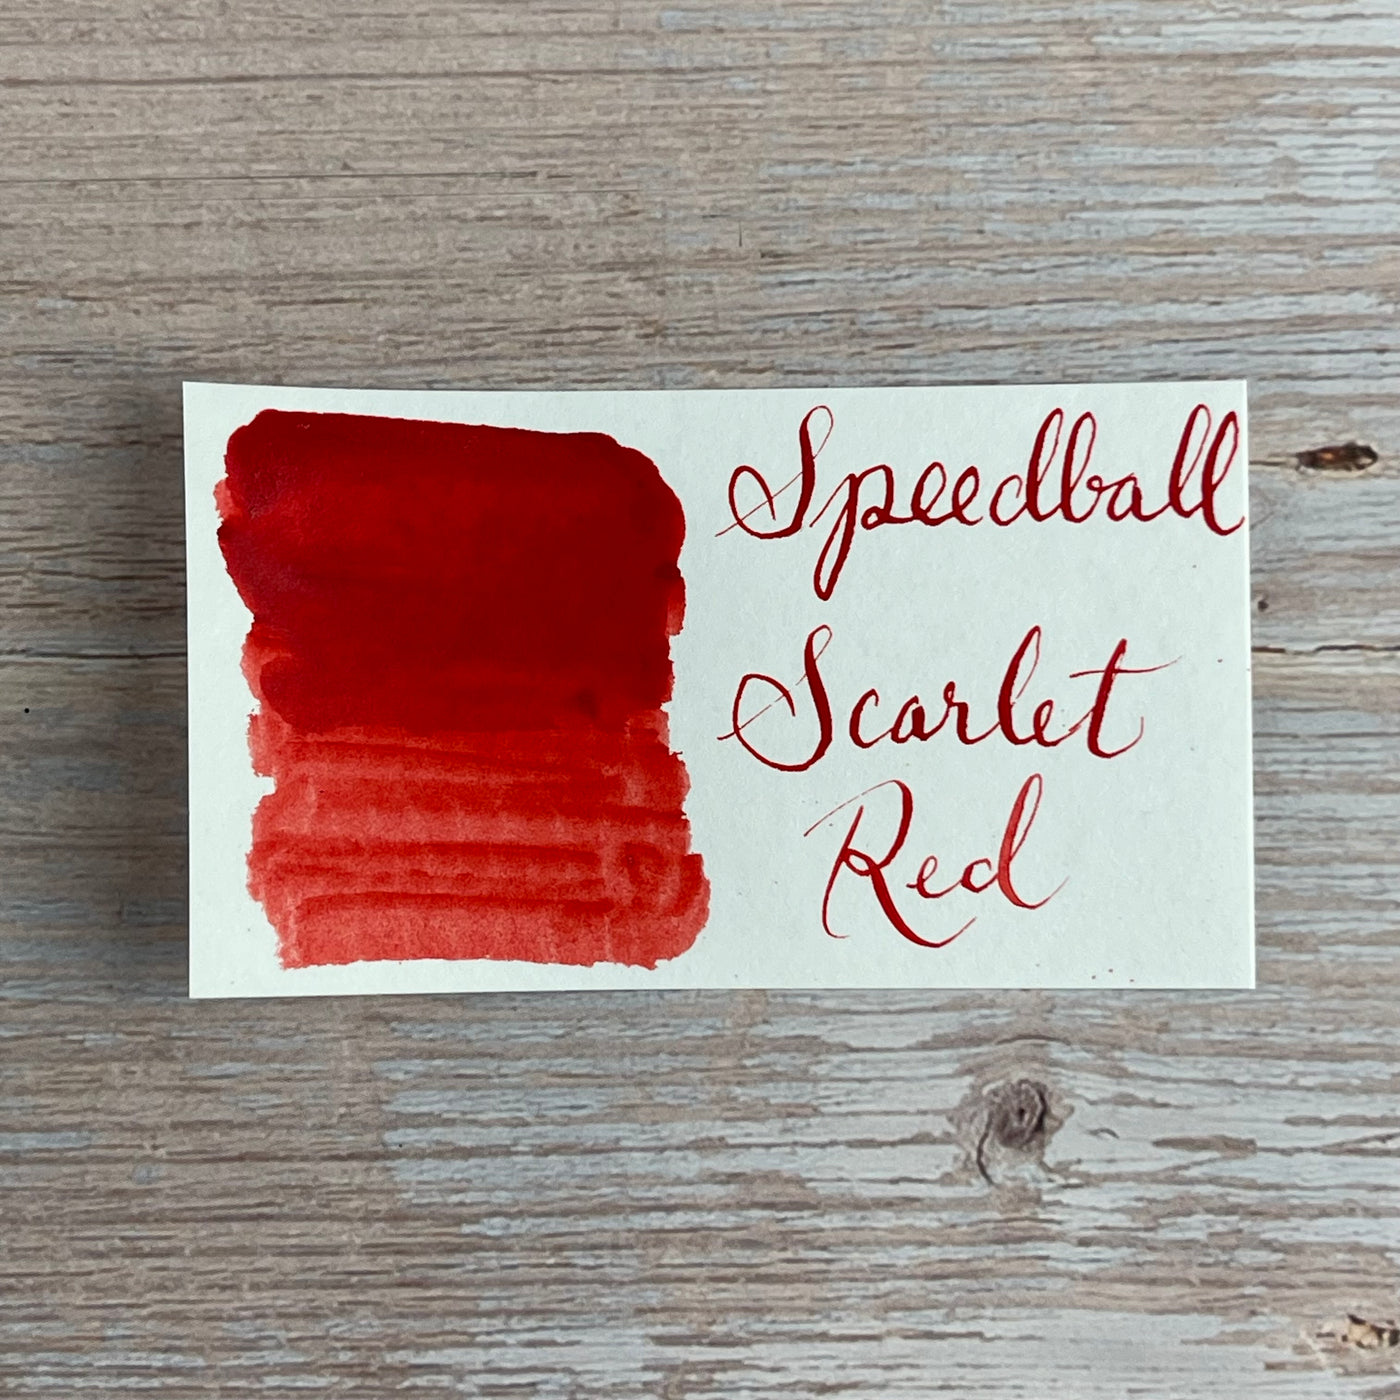 Speedball Super Pigmented Acrylic Scarlet Red - 2 oz Ink